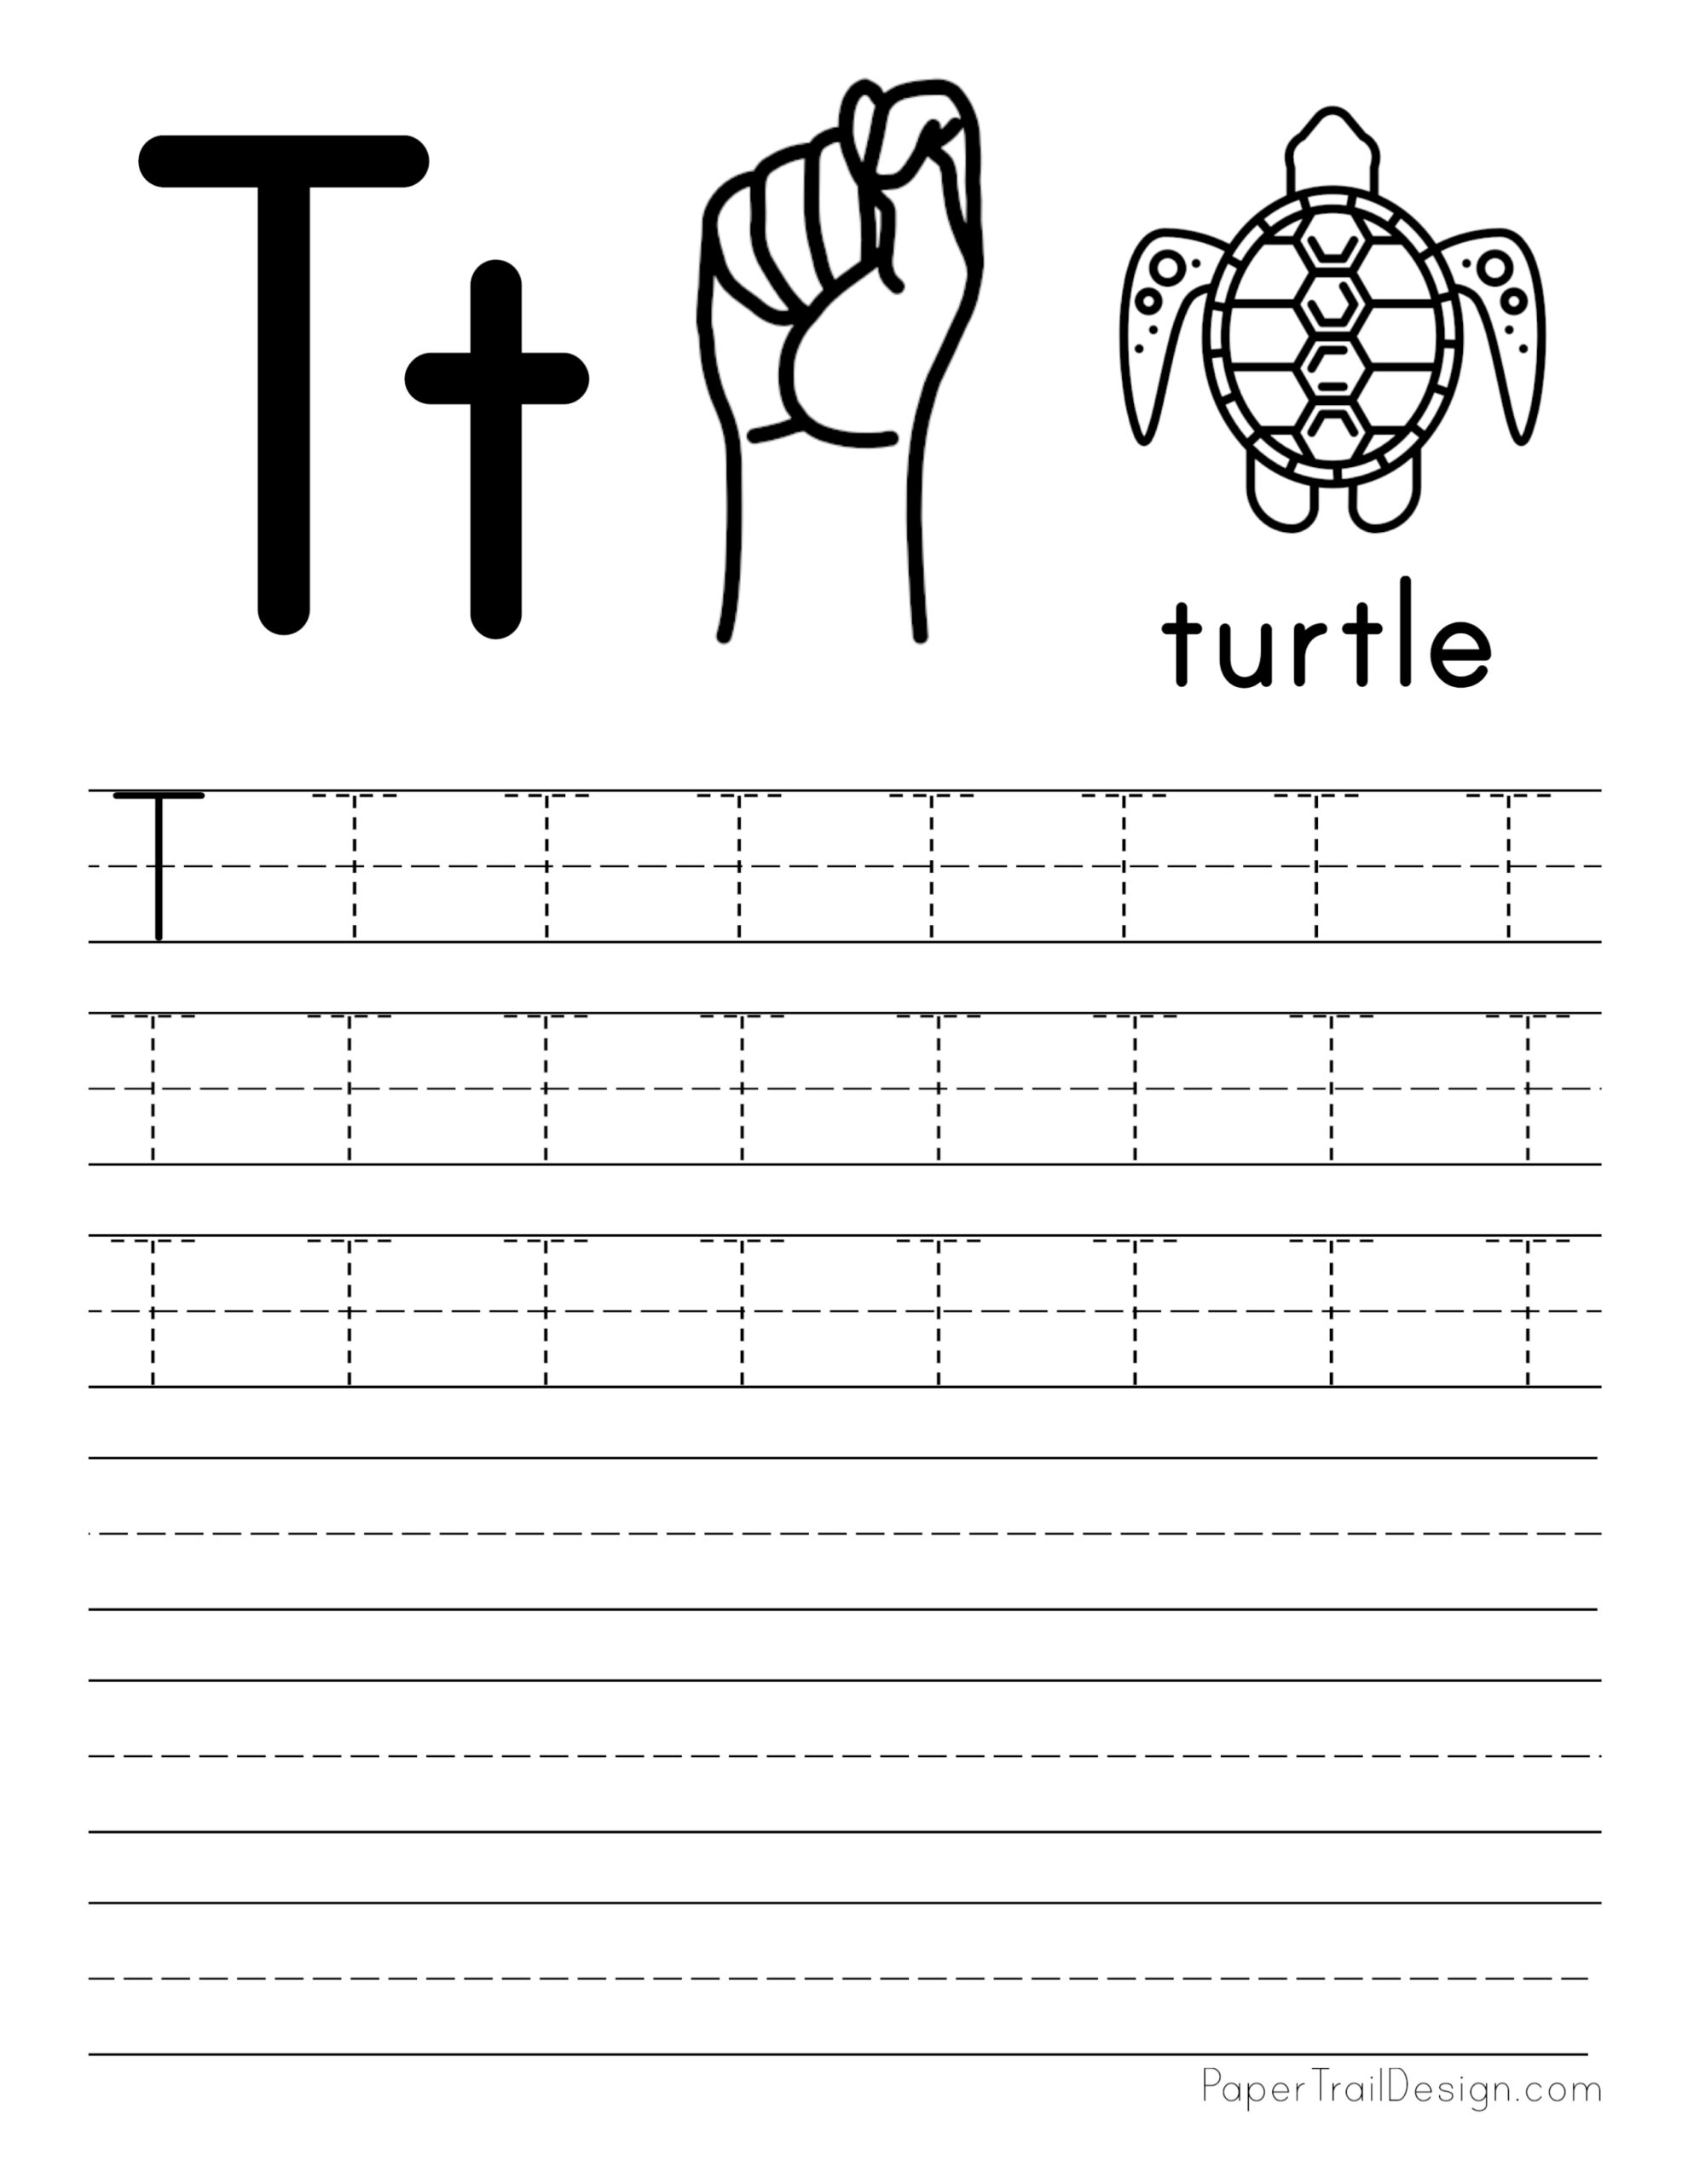 Free Letter Tracing Worksheets | Paper Trail Design